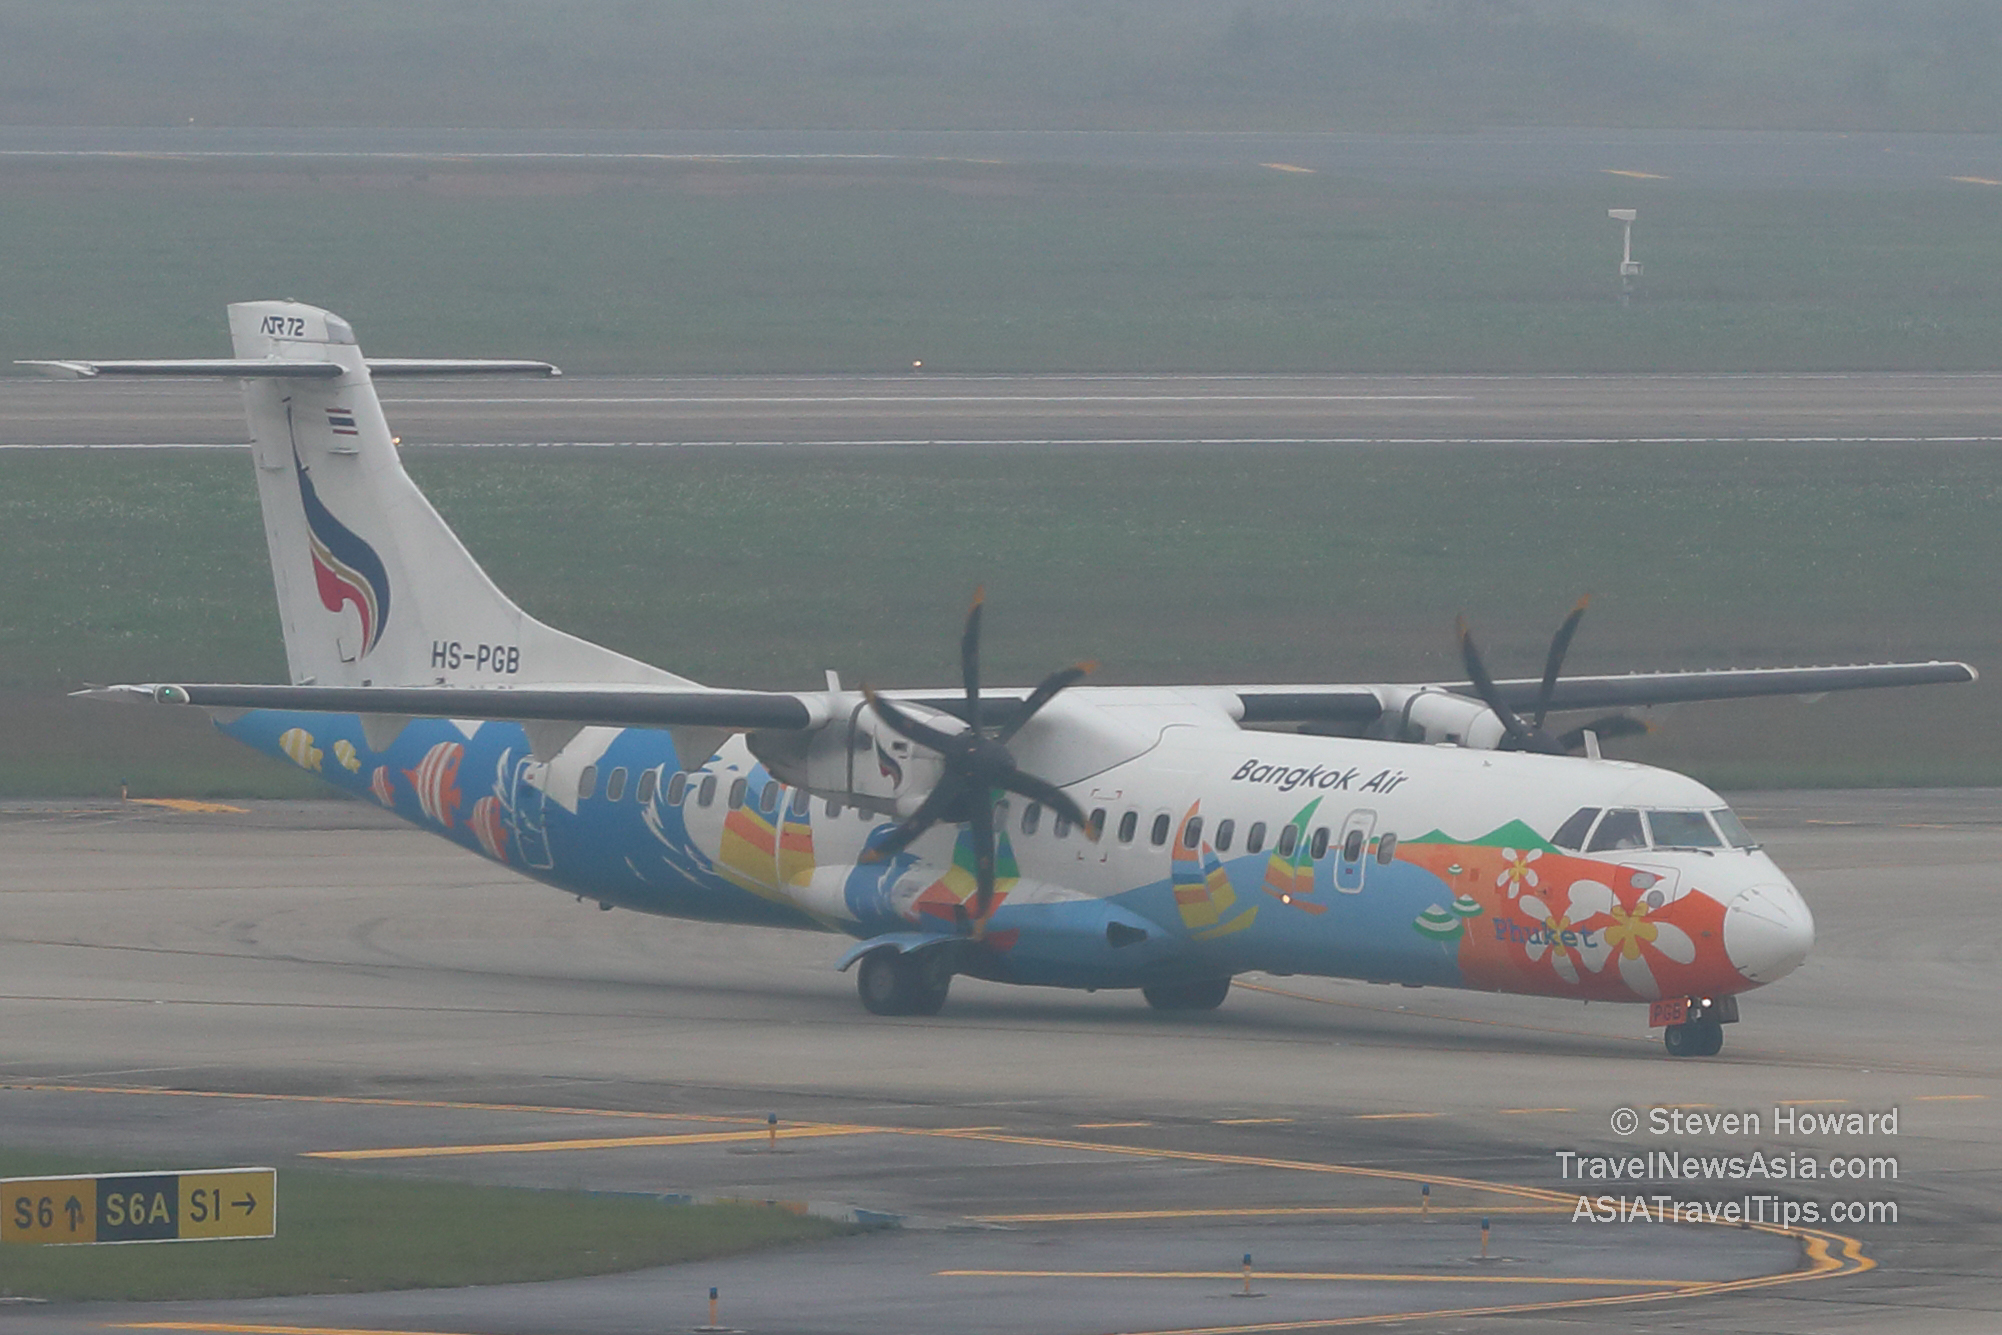 Bangkok Airways ATR 72-500. Picture by Steven Howard of TravelNewsAsia.com Click to enlarge.